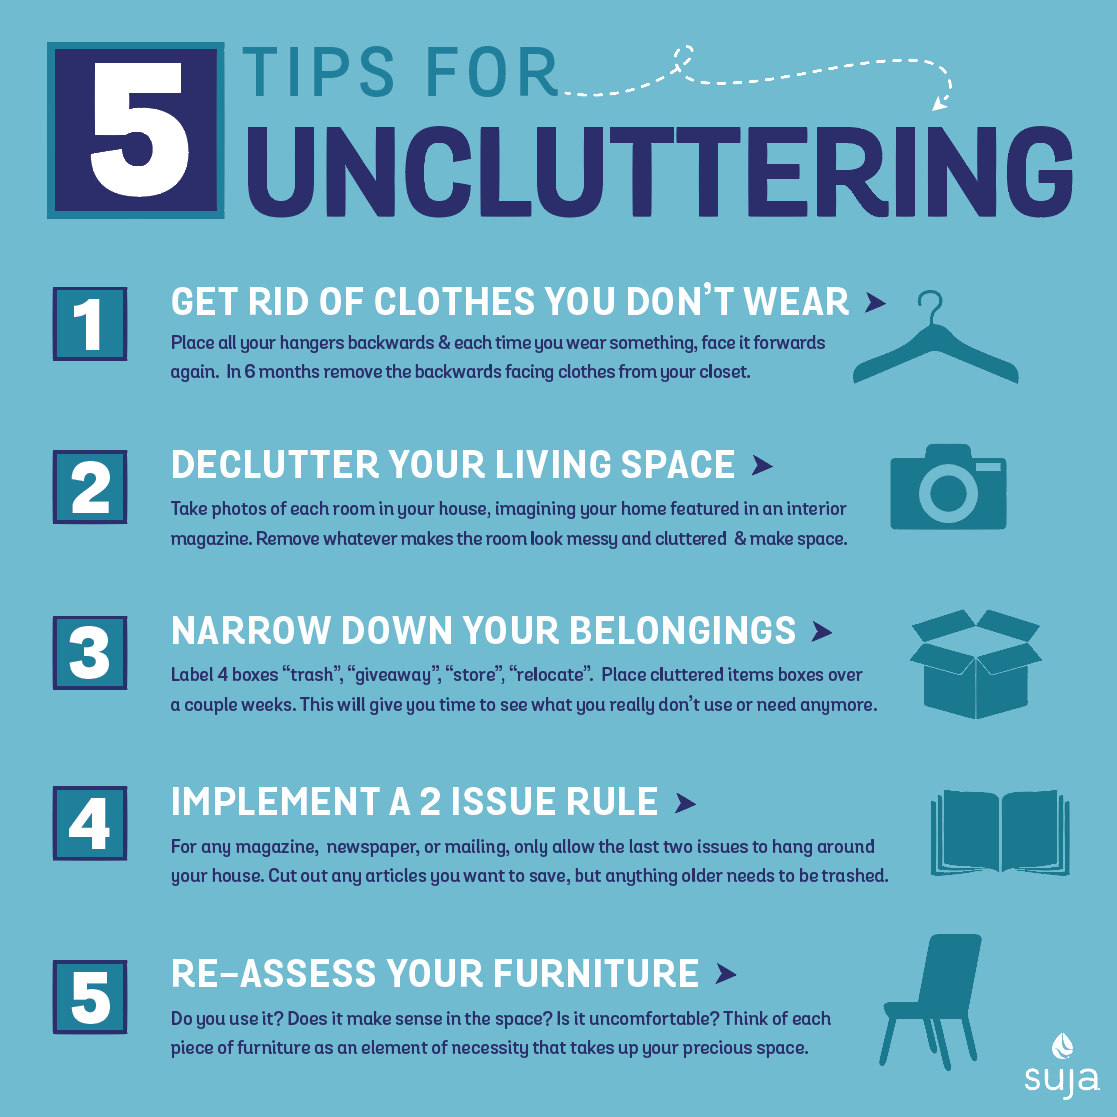 5 tips for uncluttering